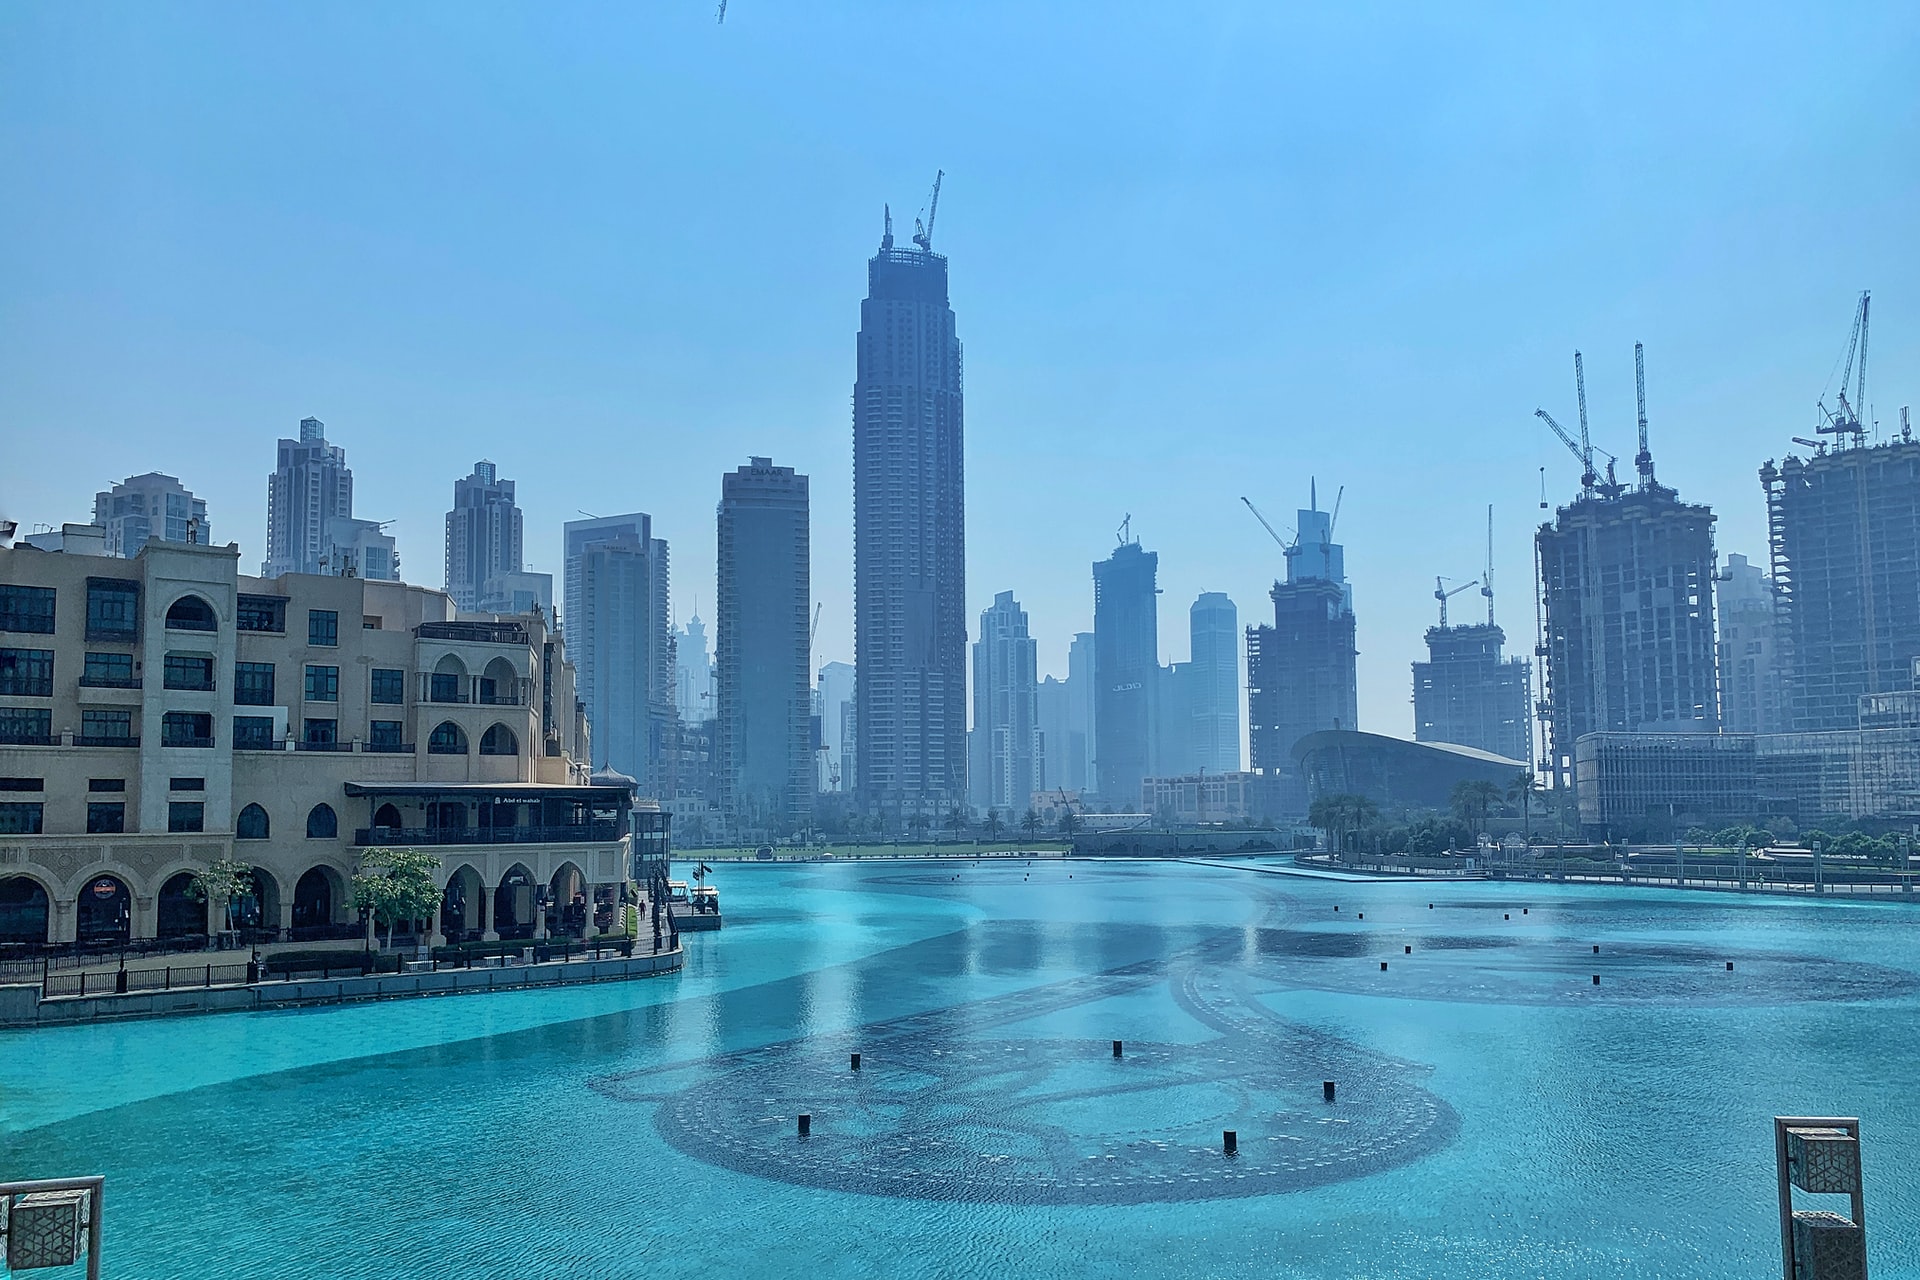 phil-shaw-zAwJJlLmo_0-unsplash_Sheikh Mohammed-Dubai's ruler, UAEs VP and Prime Minister is optimistic that the UAE Economy is in pursuit for swiftest post pandemic recovery